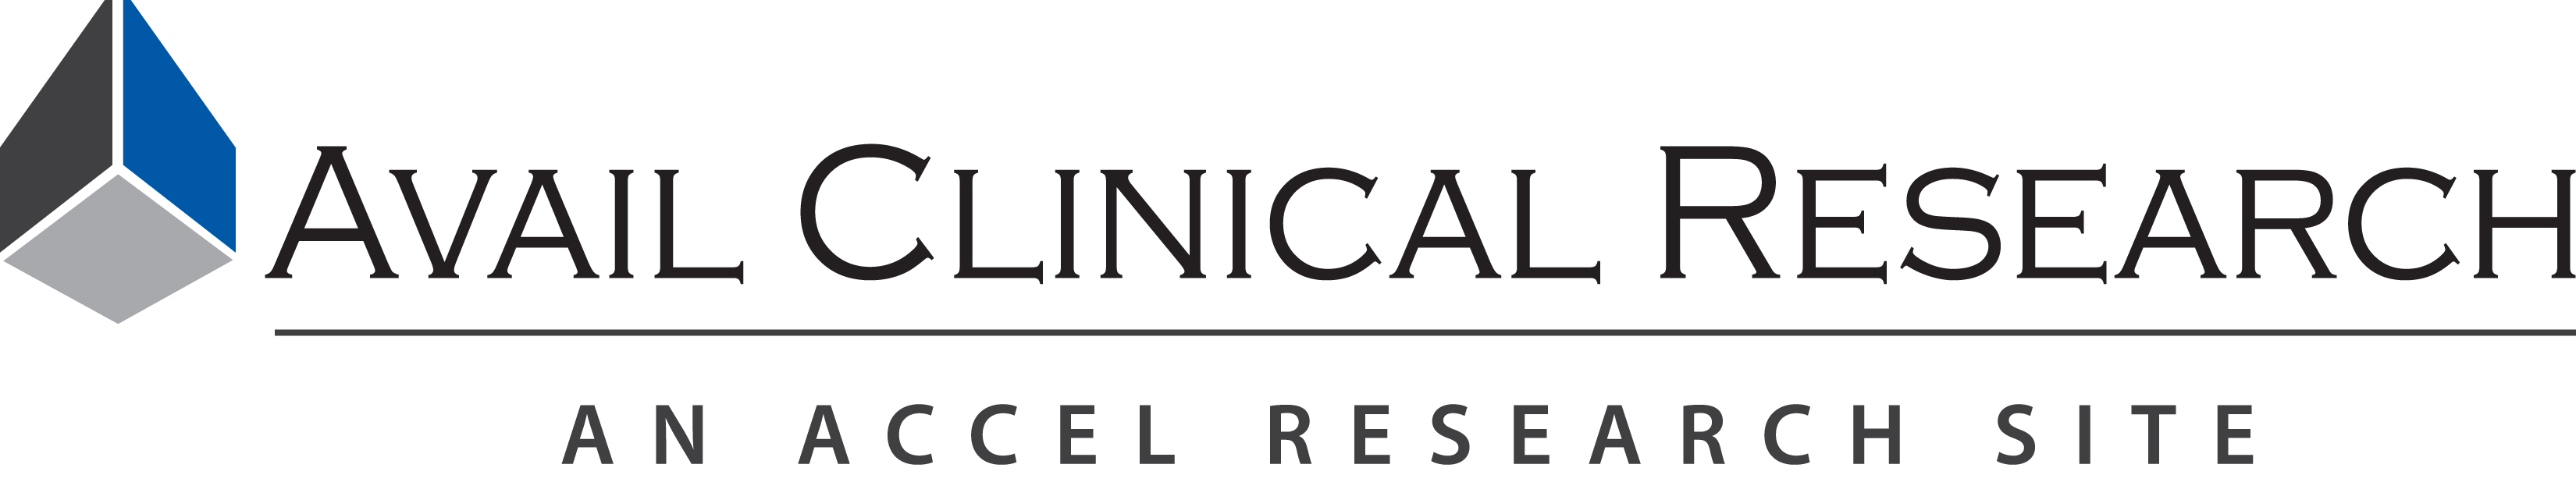 Avail Clinical Research - An Accel Research Site